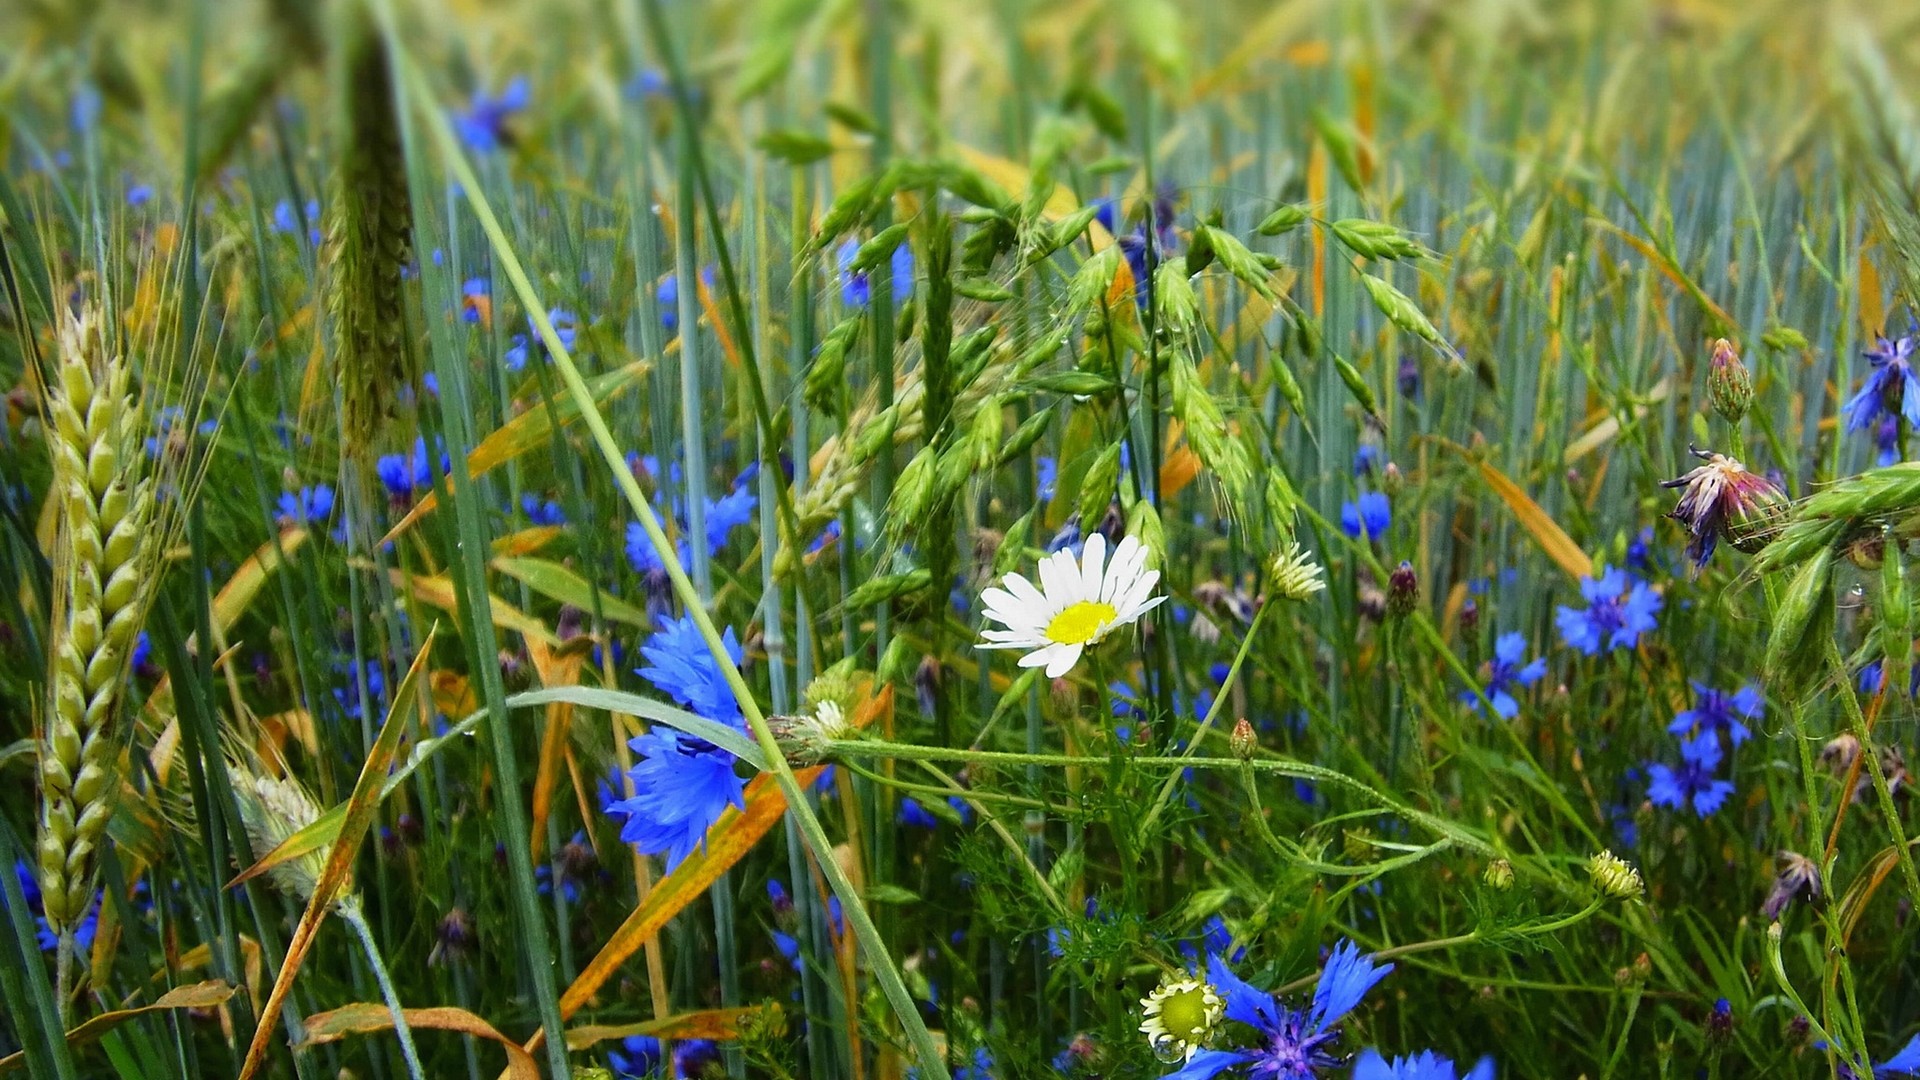 General 1920x1080 flowers grass blue flowers plants outdoors colorful